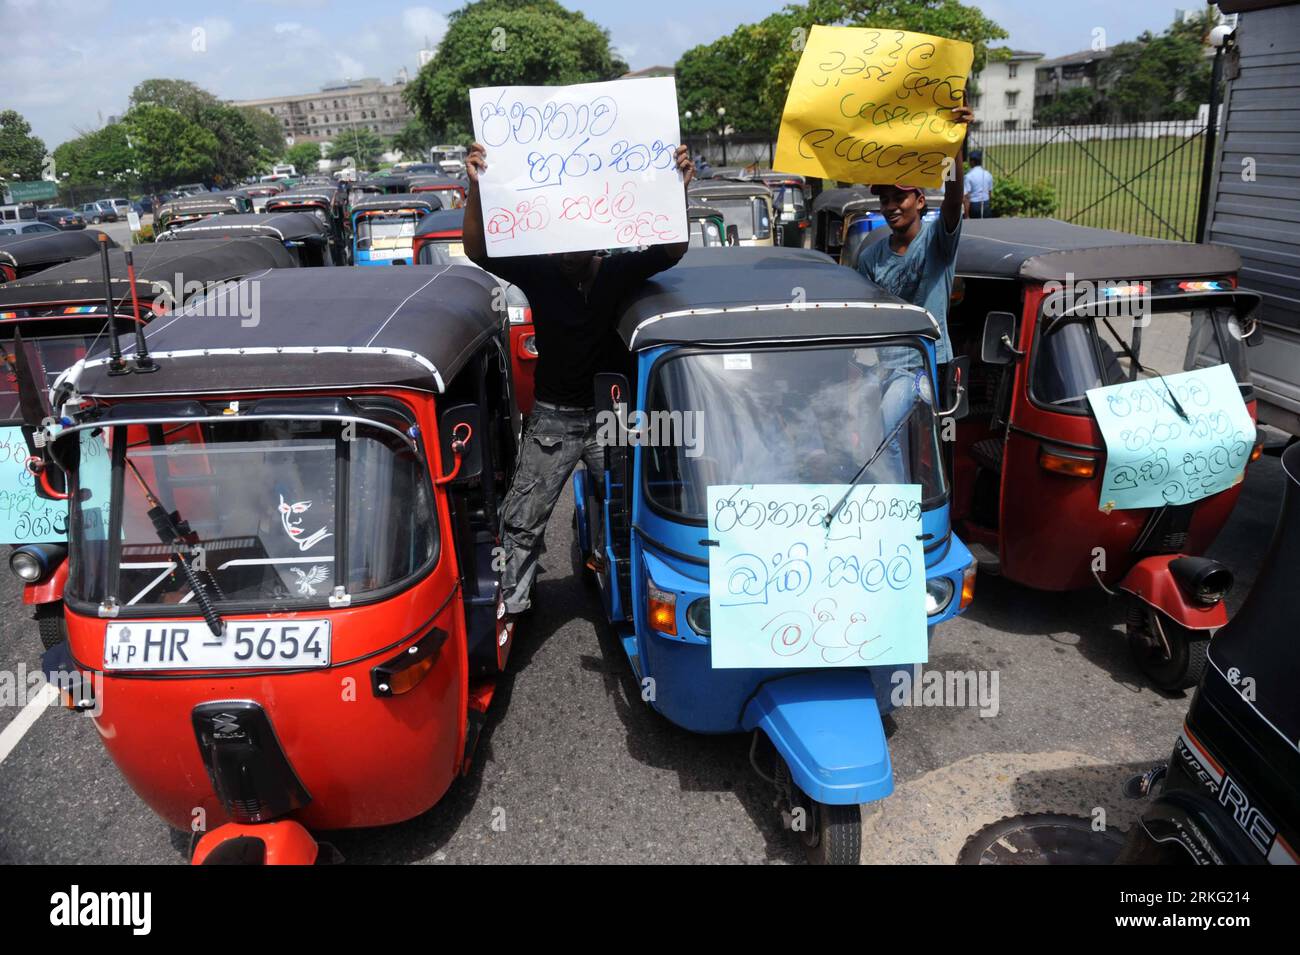 Bildnummer: 55533175  Datum: 21.06.2011  Copyright: imago/Xinhua (110621) -- COLOMBO, June 21, 2011 (Xinhua) -- Sri Lankan three-wheel taxi drivers stage a rally in Colombo, capital of Sri Lanka, on June 21, 2011. Hundreds of drivers joined the rally here to protest against the introduction of a fleet of Indian-made Tata Nano vehicles, which is said to be the world s cheapest car to compete with the ubiquitous three-wheel taxis. (Xinhua/Pushpika Karunaratne) (lr) SRI LANKA-COLOMBO-PROTEST PUBLICATIONxNOTxINxCHN Politik Proteste x0x xkg 2011 quer     Bildnummer 55533175 Date 21 06 2011 Copyrigh Stock Photo